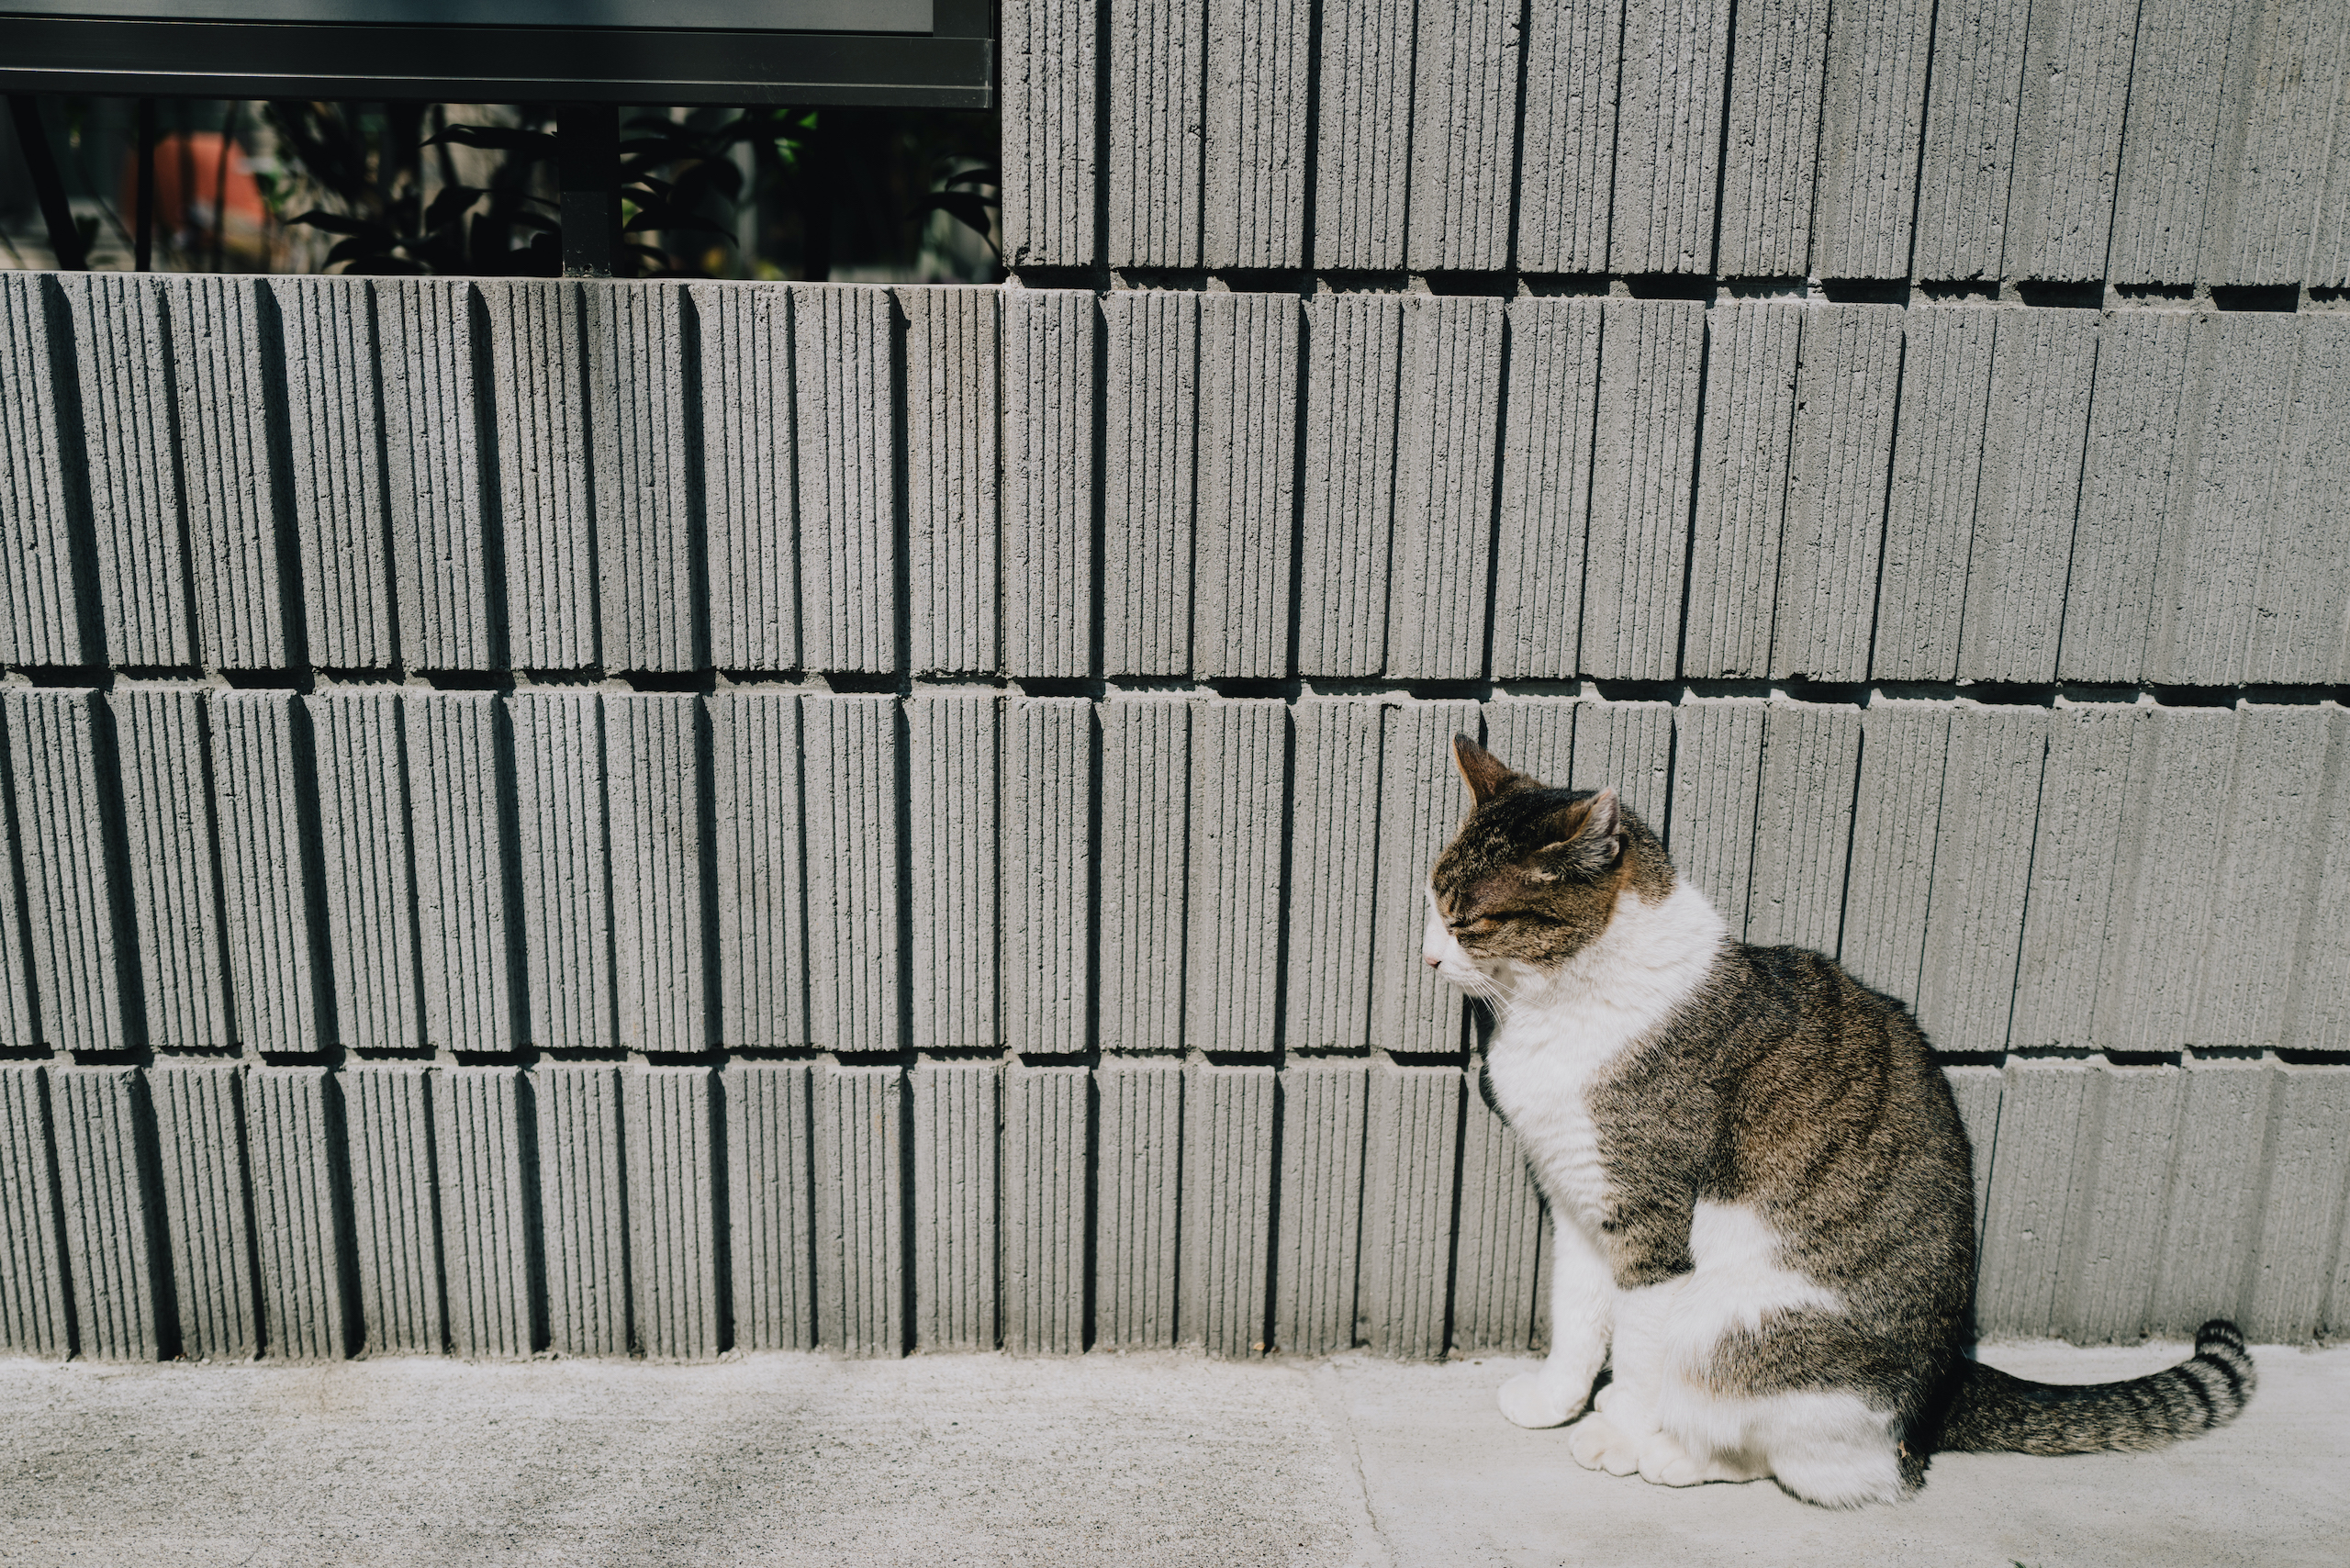 A cat sunbathing in Tokyo, Japan. Photographed with a Leica Q2.